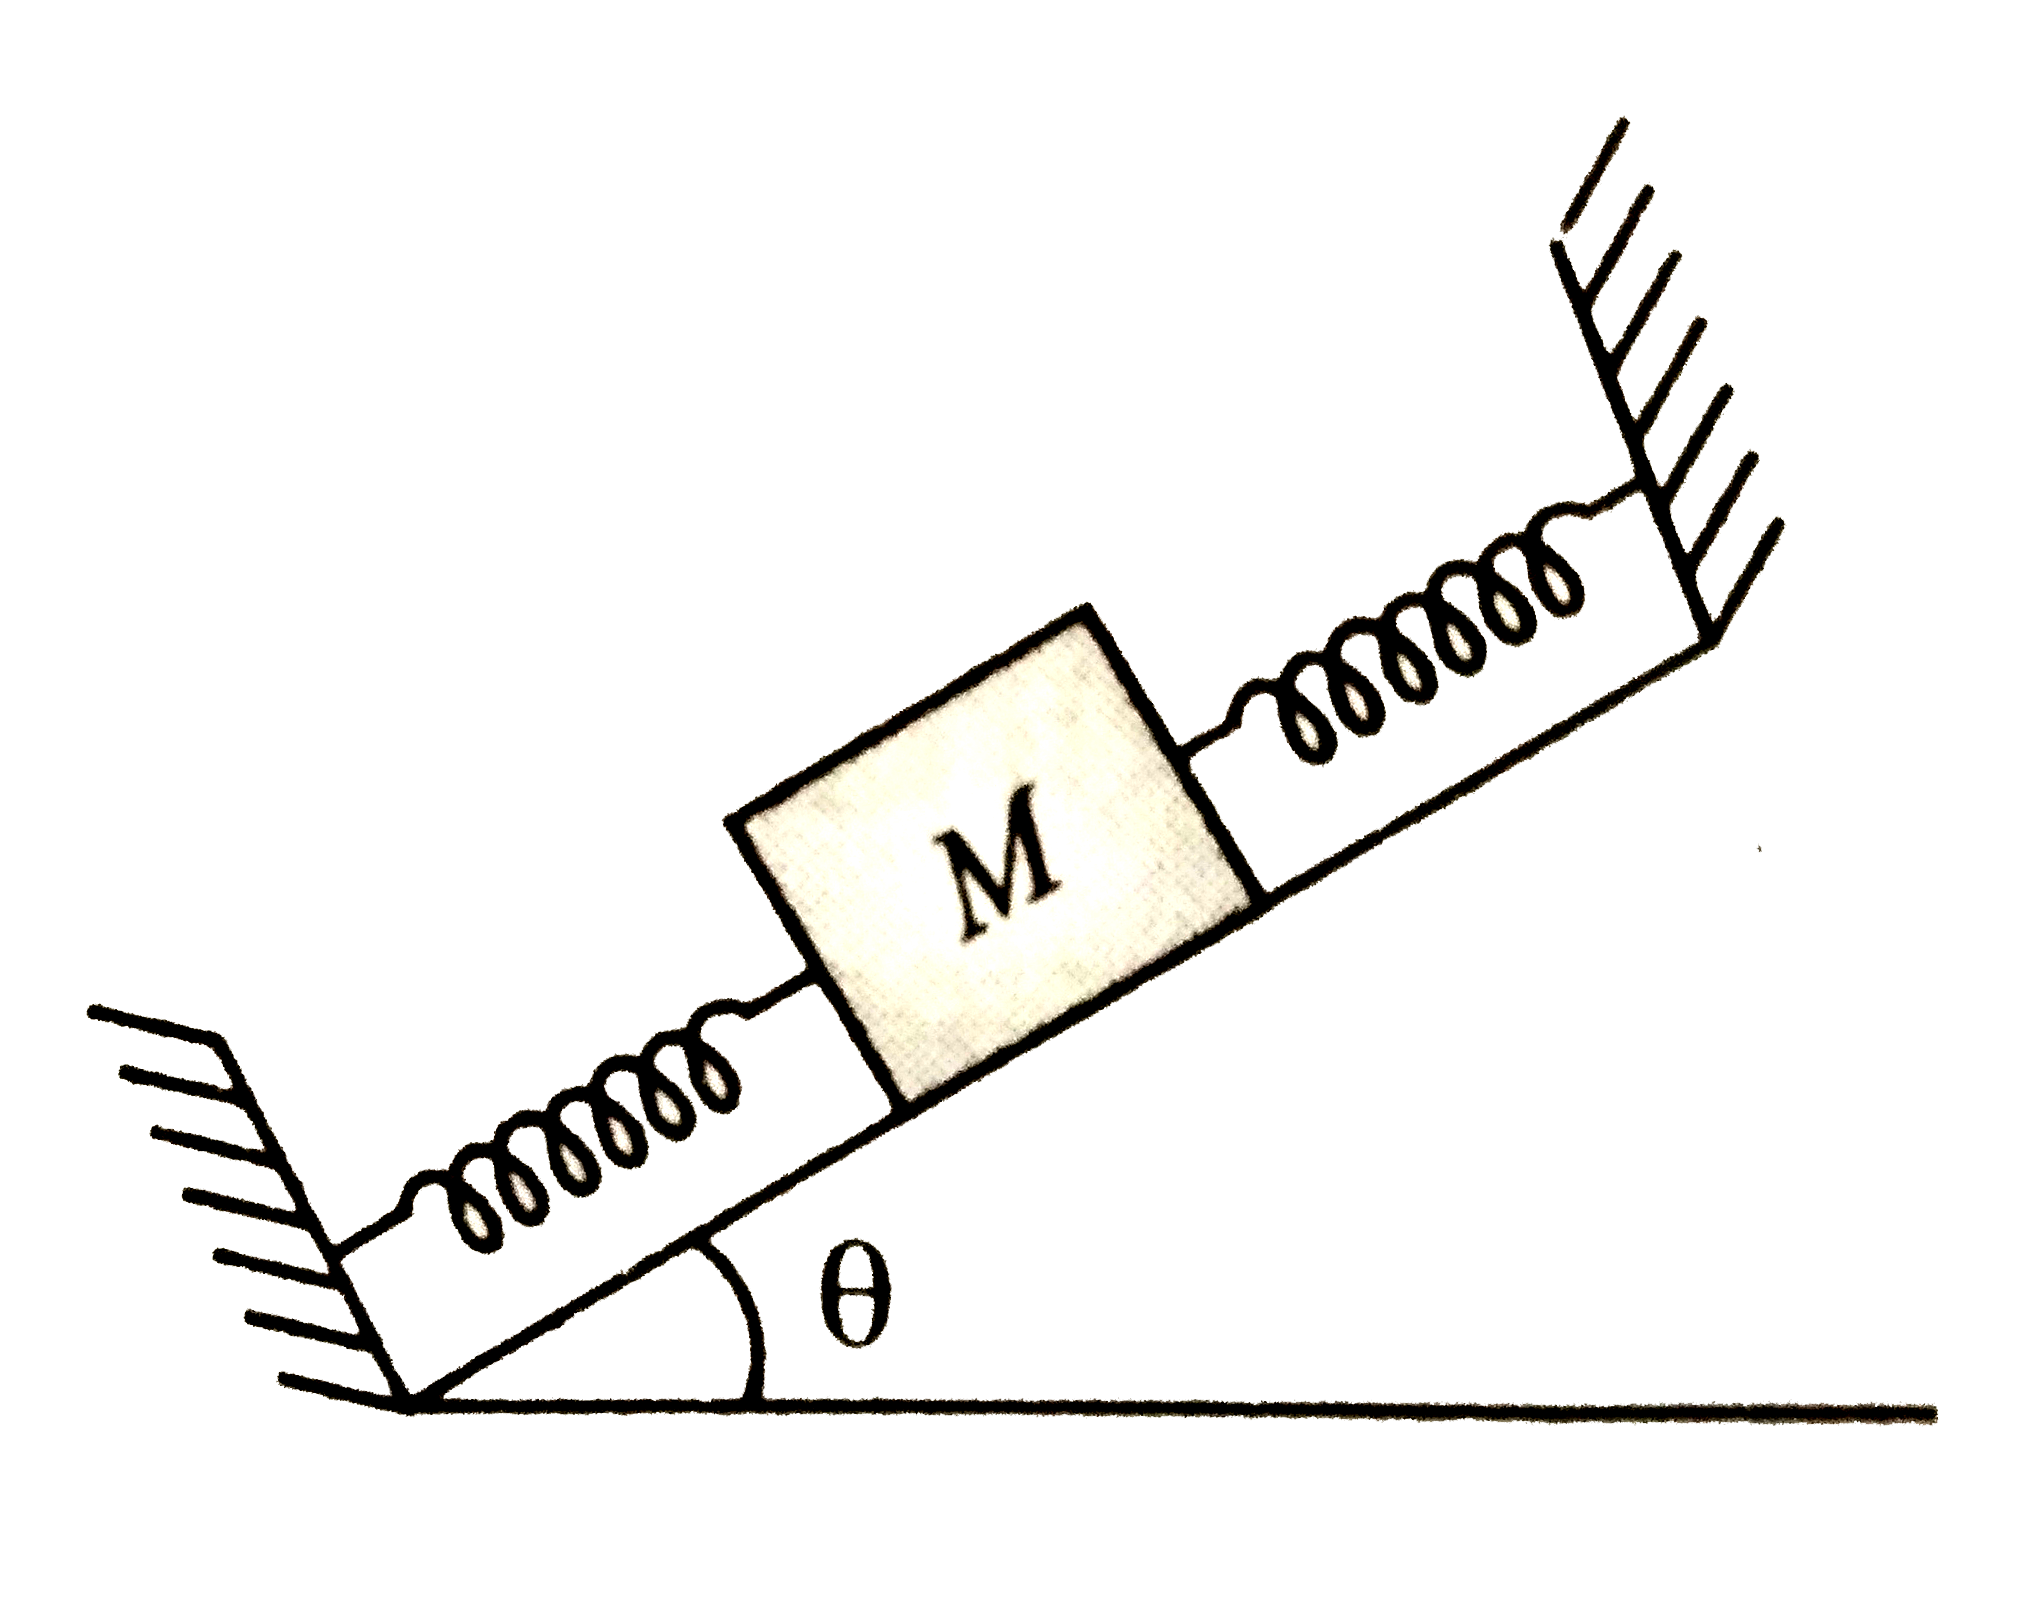 On a smooth inclined plane, a block of mass M is attached between two springs as shown in the figure. The other ends of the springs are fixed to firm supports. If  each spring has spring constant k, the period of oscillation of the block is (Assuming the springs as massless)